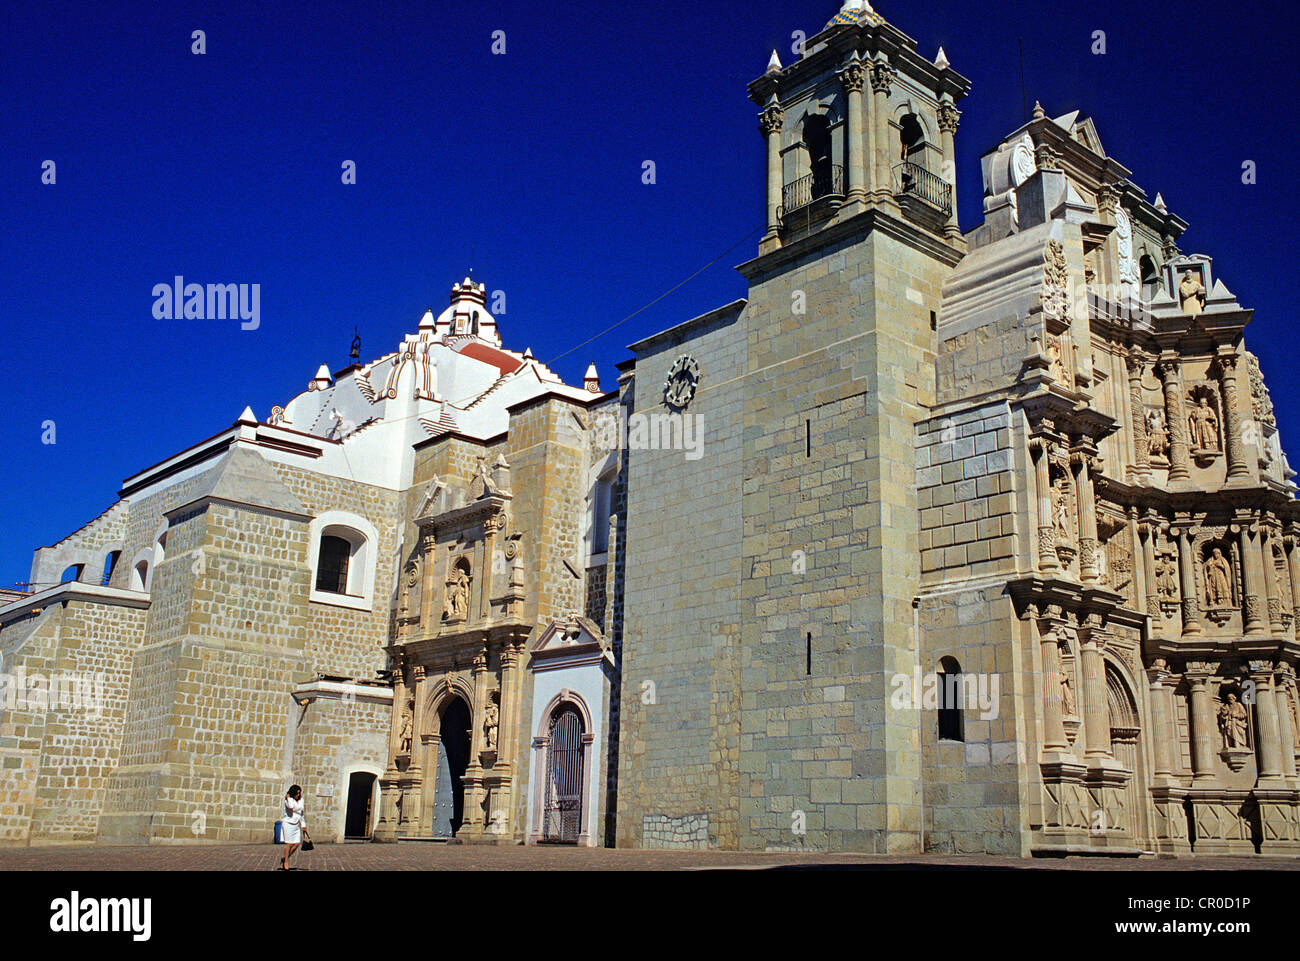 Mexico, Oaxaca State, Oaxaca city, historical center listed as World Heritage by UNESCO, Soledad basilica Stock Photo